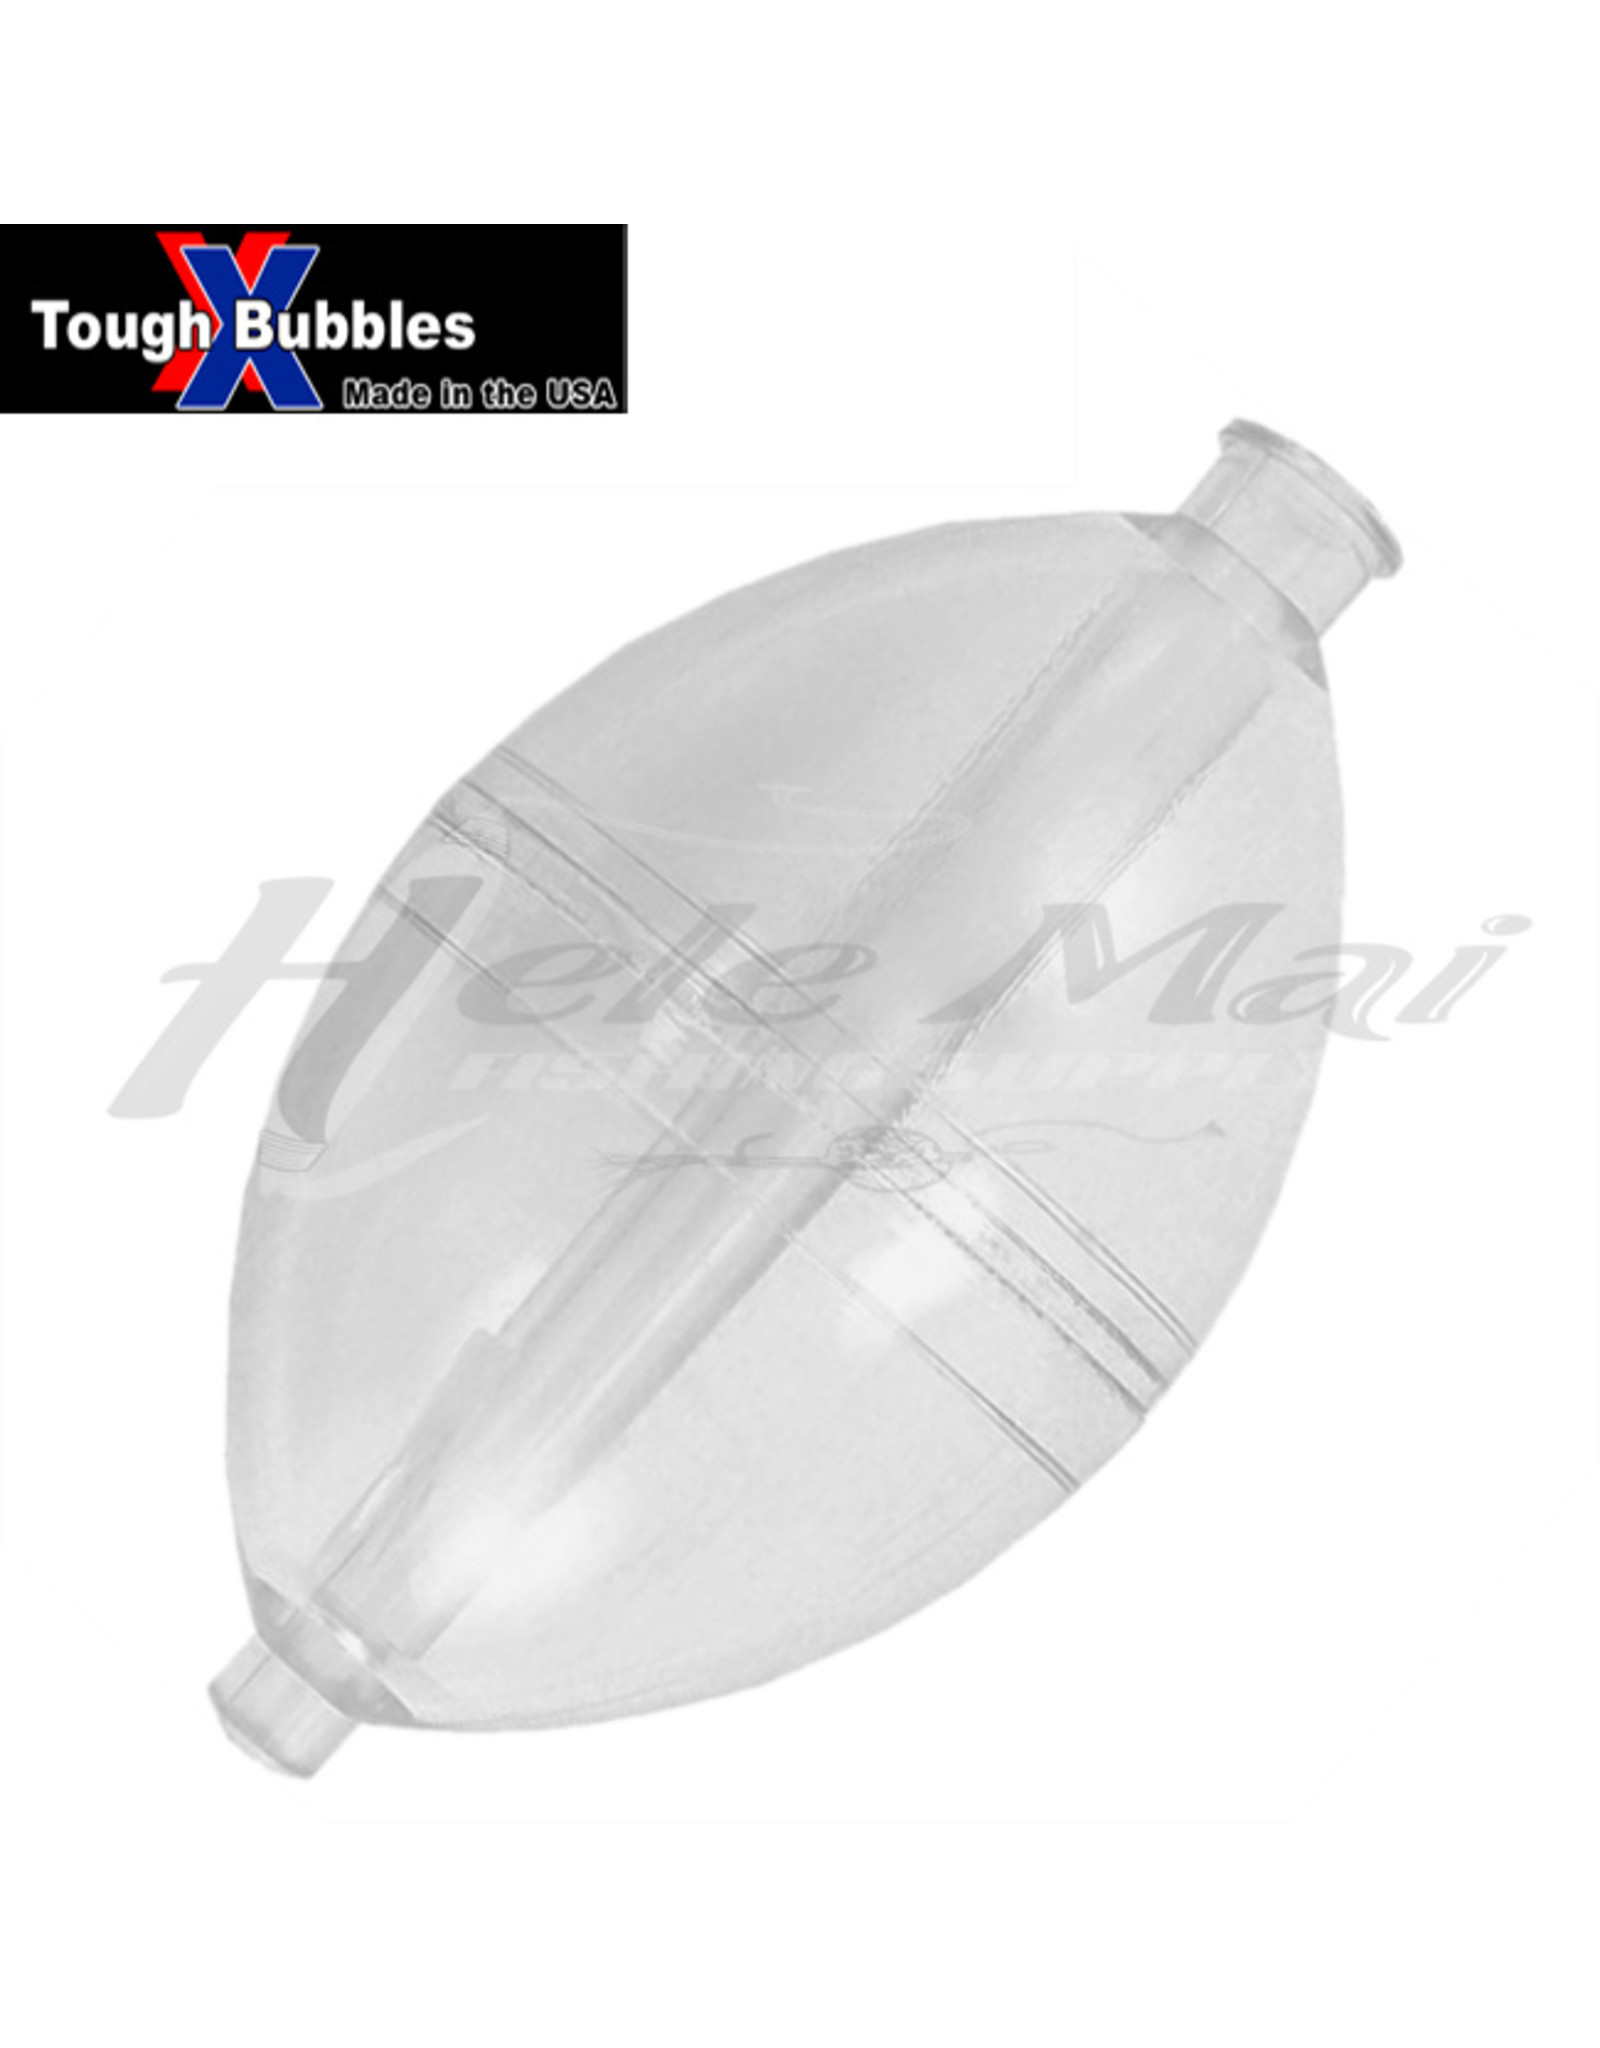 DOUBLE X TACKEL (DXT) XDXT, TOUGH BUBBLE CLEAR SMALL